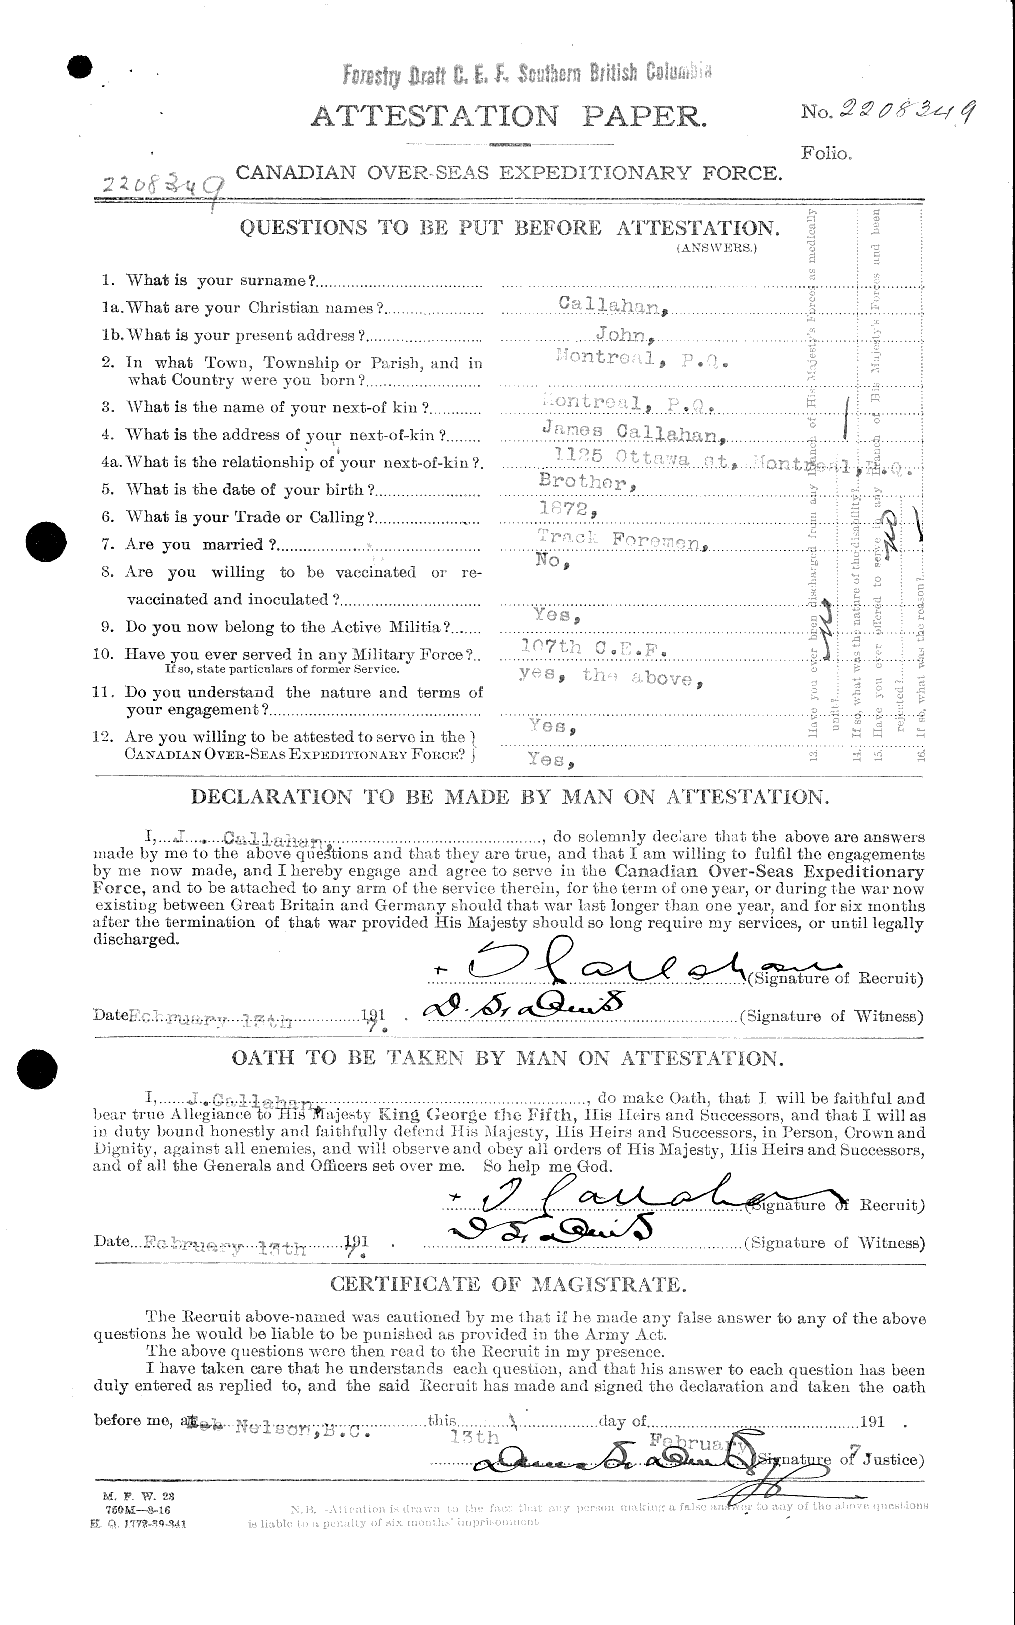 Personnel Records of the First World War - CEF 000621a